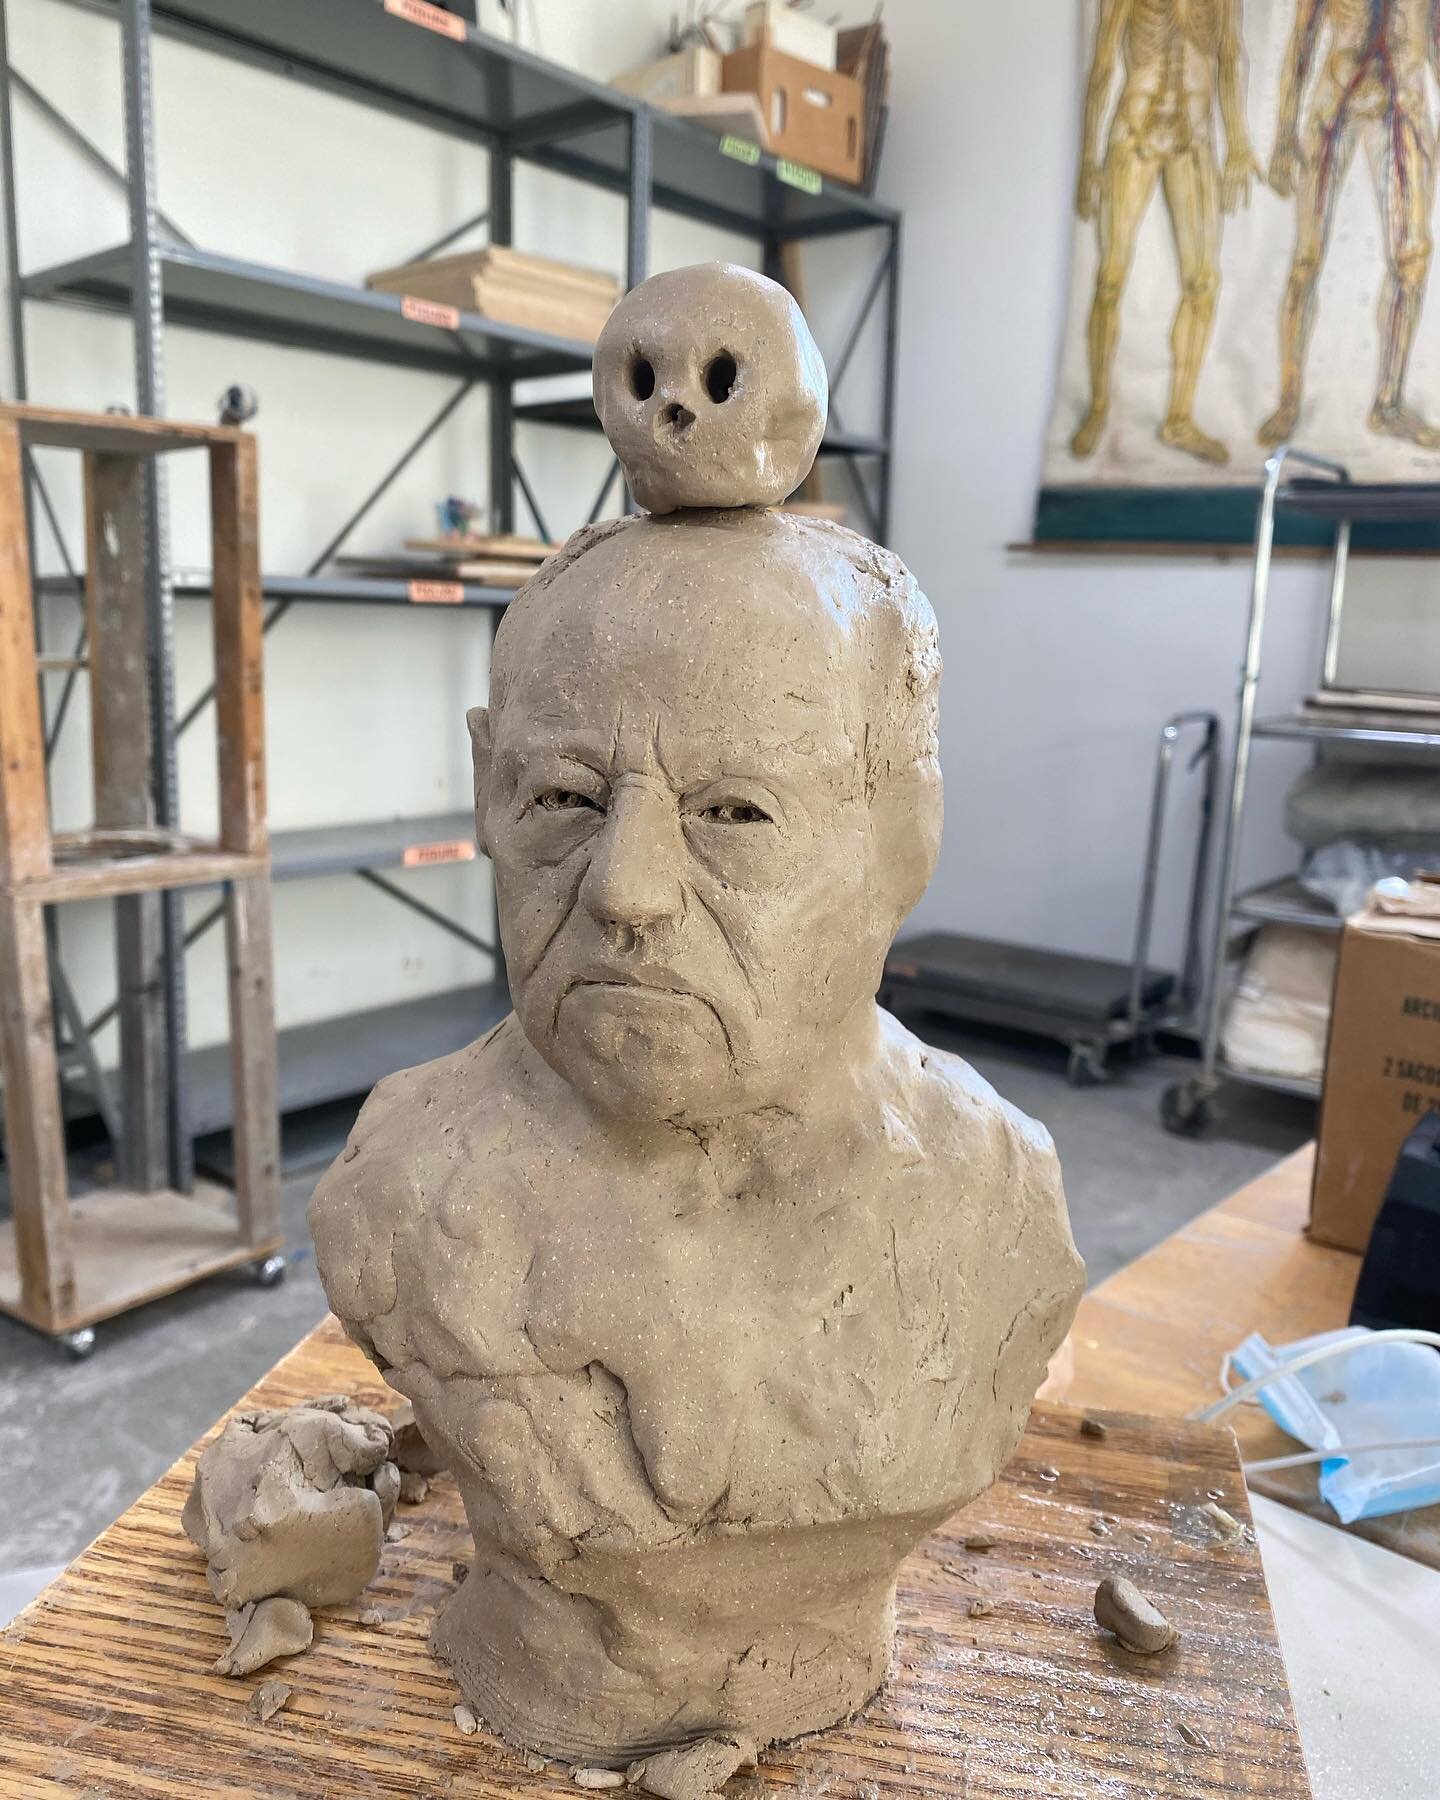 A rough start to my #wernerherzog portrait I&rsquo;ve been demoing for my sculpture class @harvardceramics . I&rsquo;m not a big celebrity portrait person but this dude has been fun. 
#ceramics #portrait #portraitsculpture #ceramicsculpture